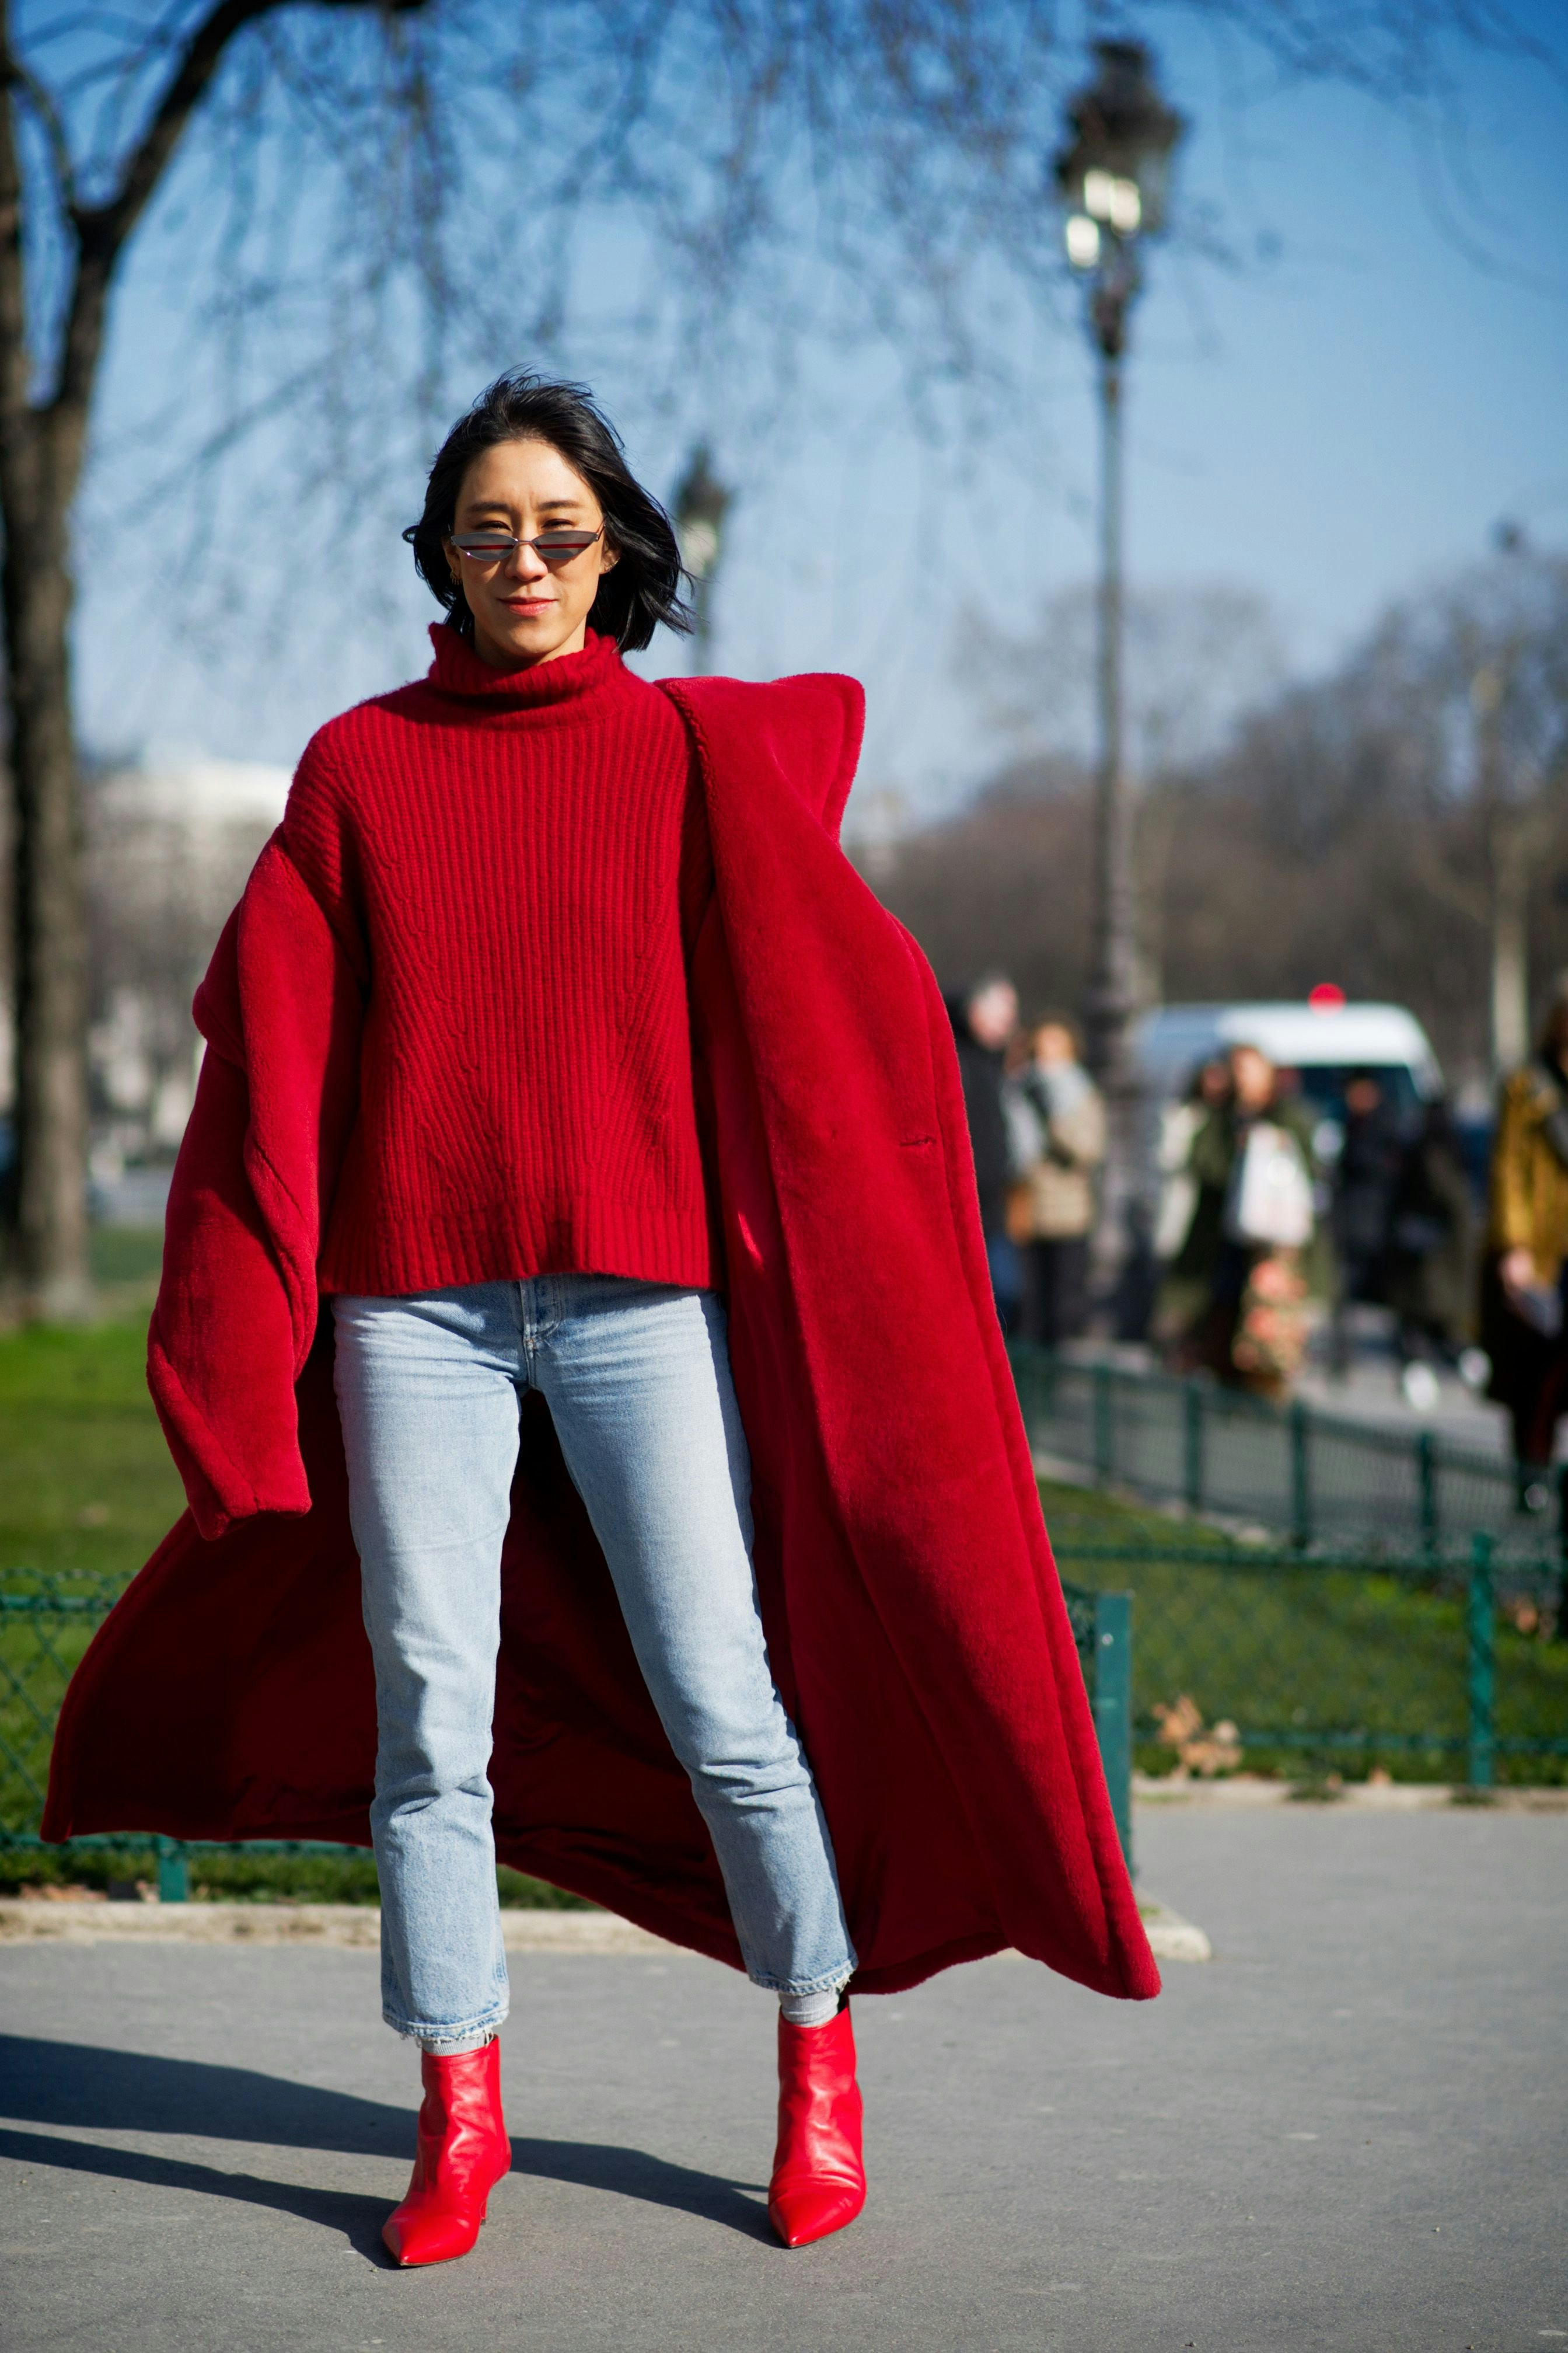 How To Style A Teddy Bear Coat, The Warm And Chic Winter Staple